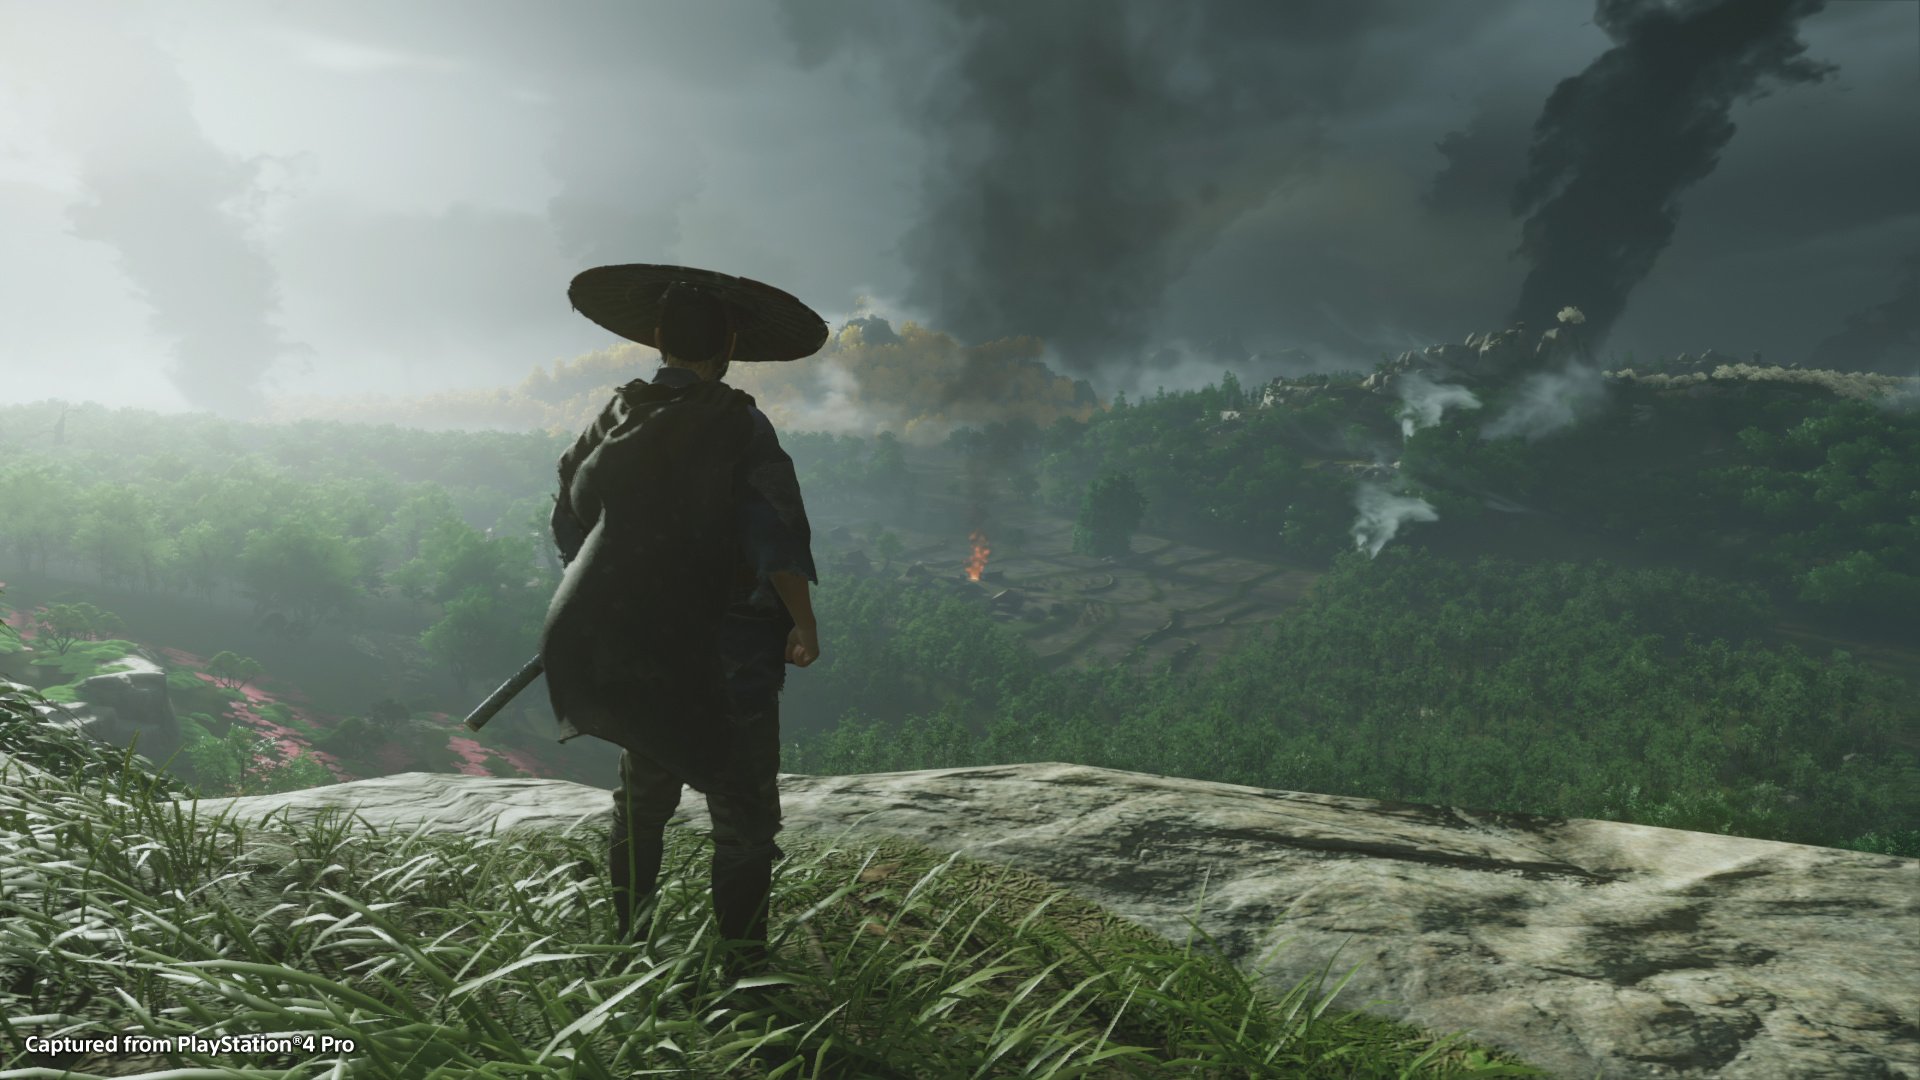 Ghost Of Tsushima Review — The Captivating Samurai Game We've Been Crying  Out For –